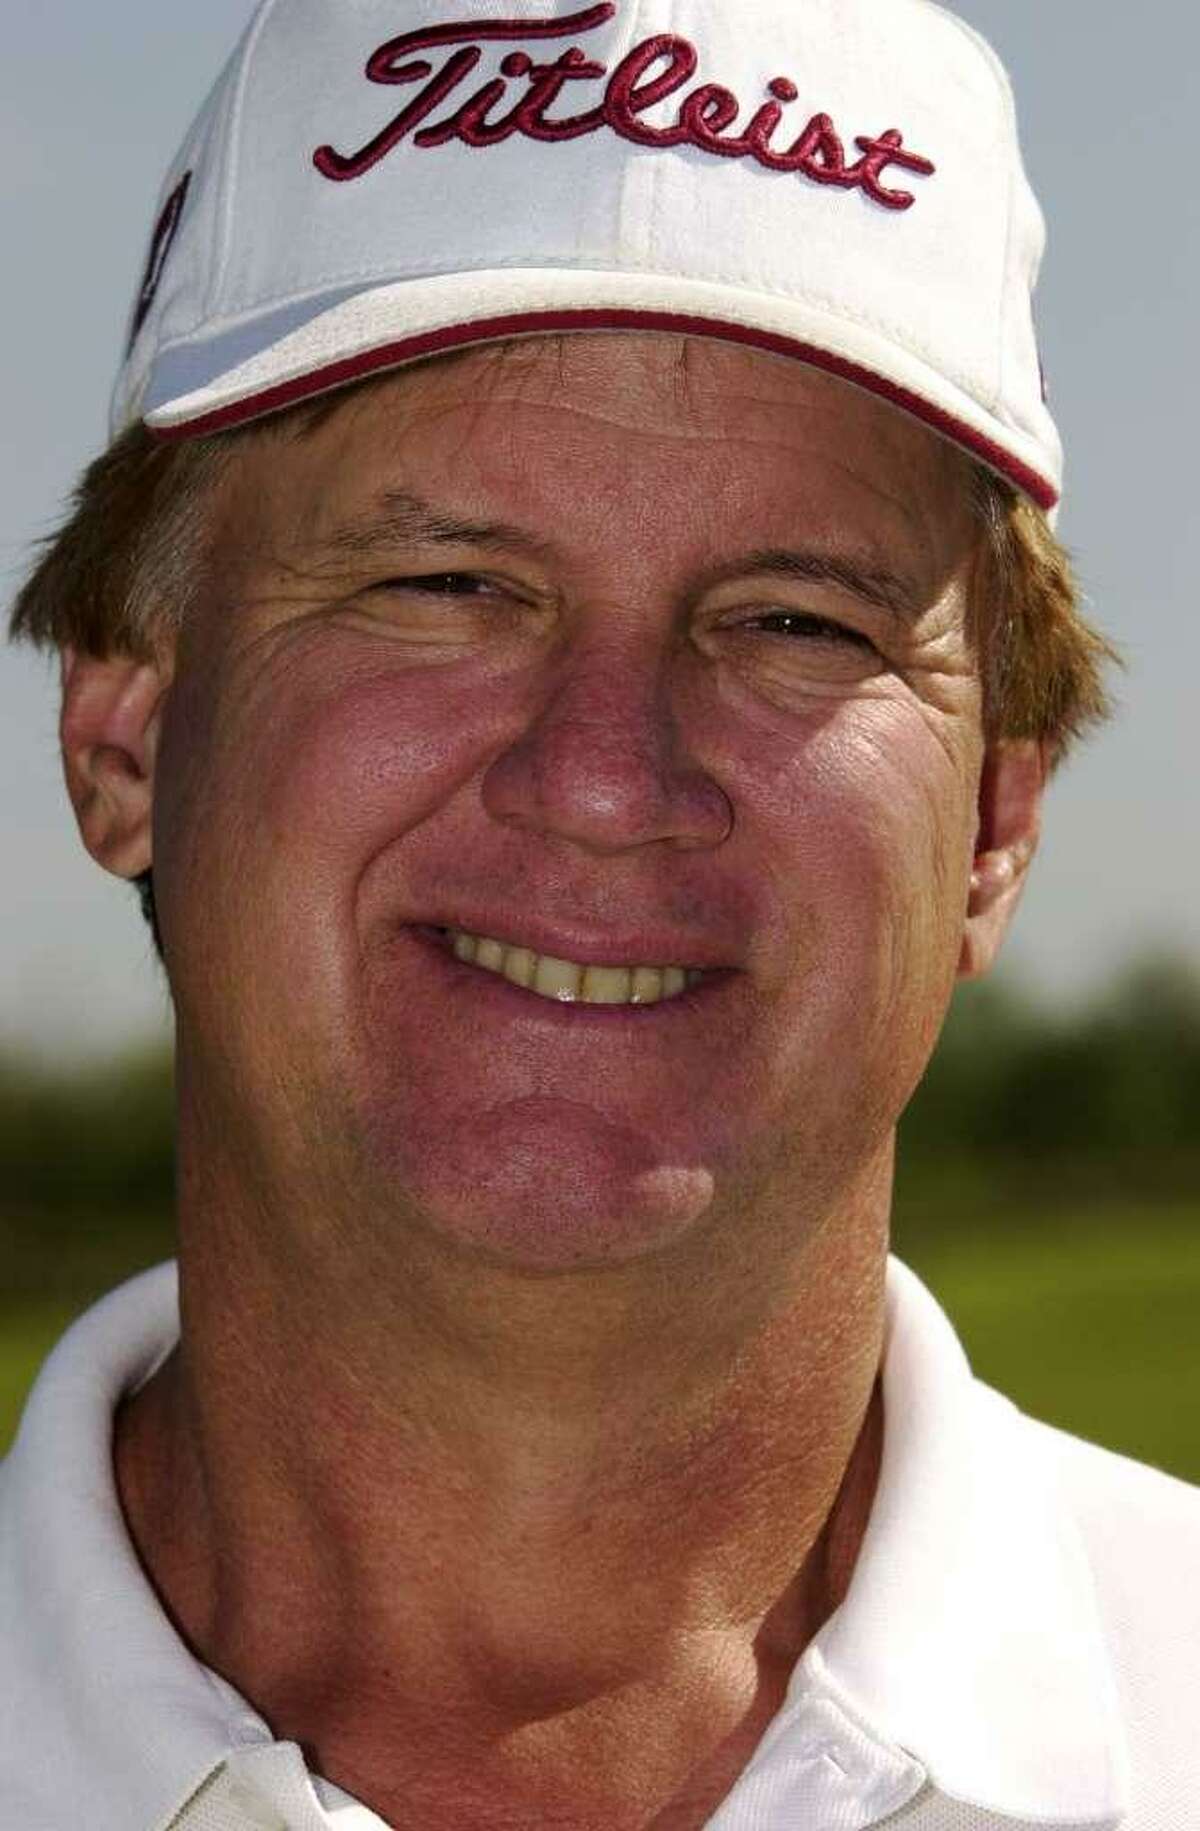 Kurt Cox played professionally both nationally and internationally after becoming one of the top amateur golfers in the U.S.